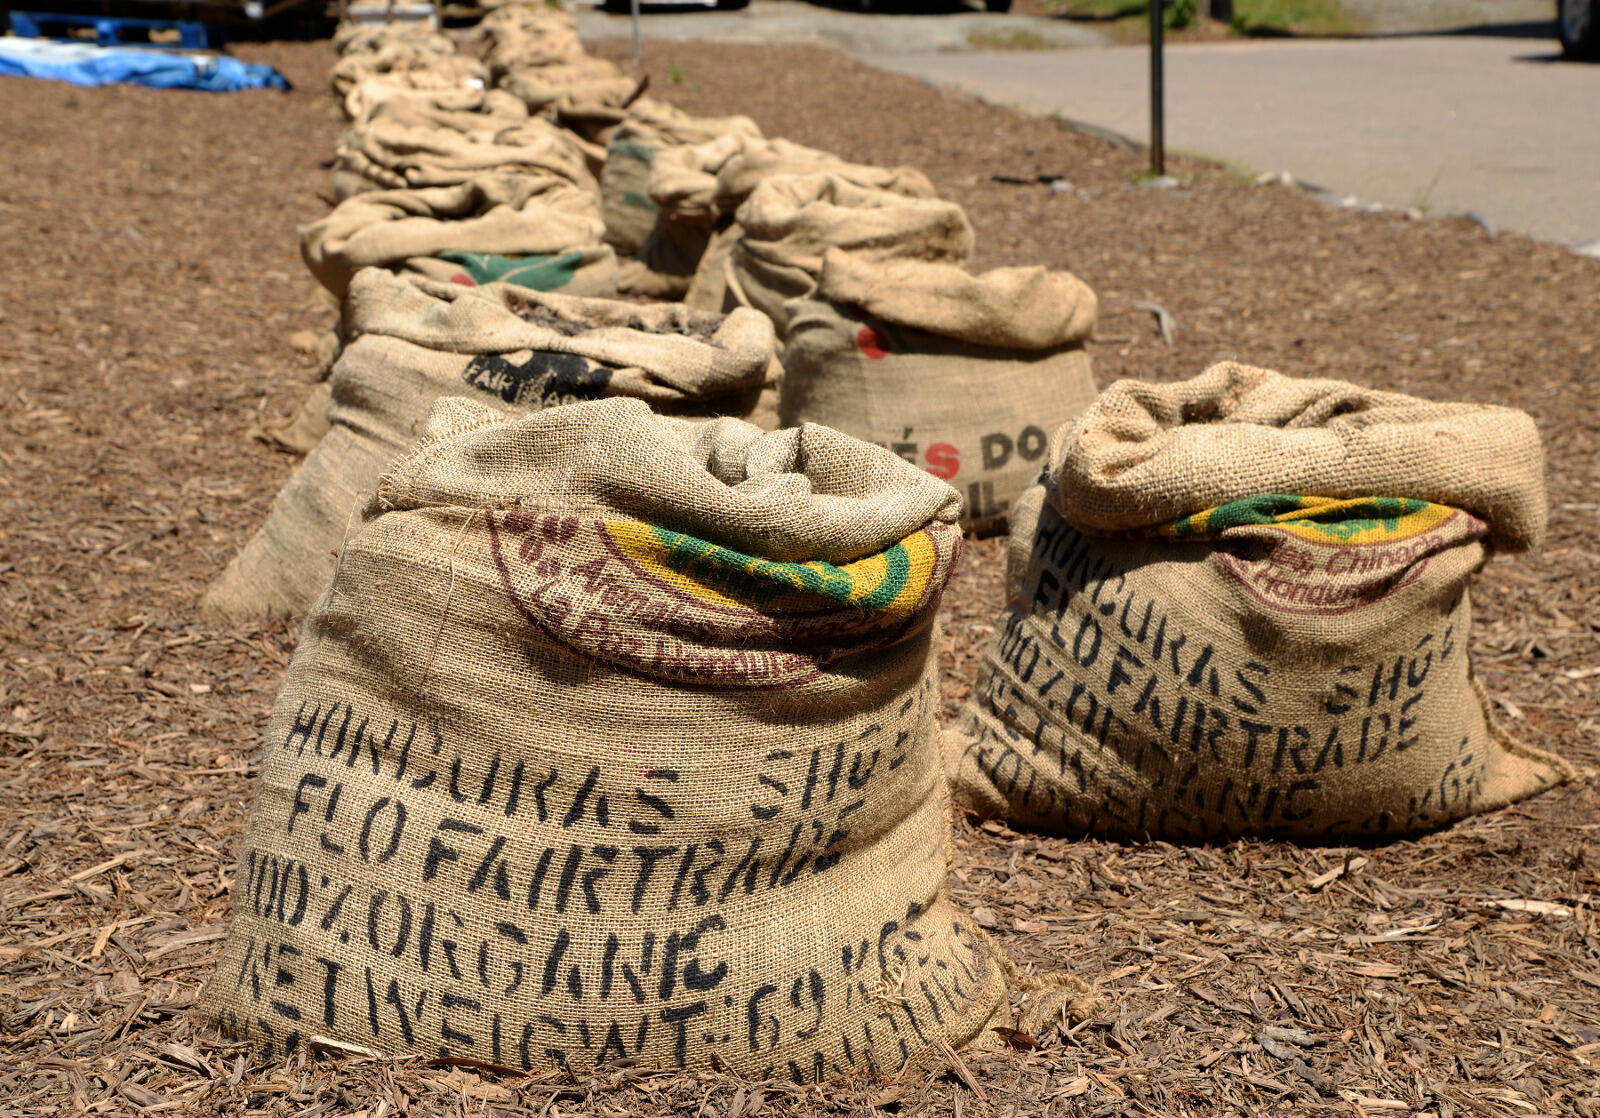 Recycled coffee bags have been pressed into use as containers to grow potatoes.